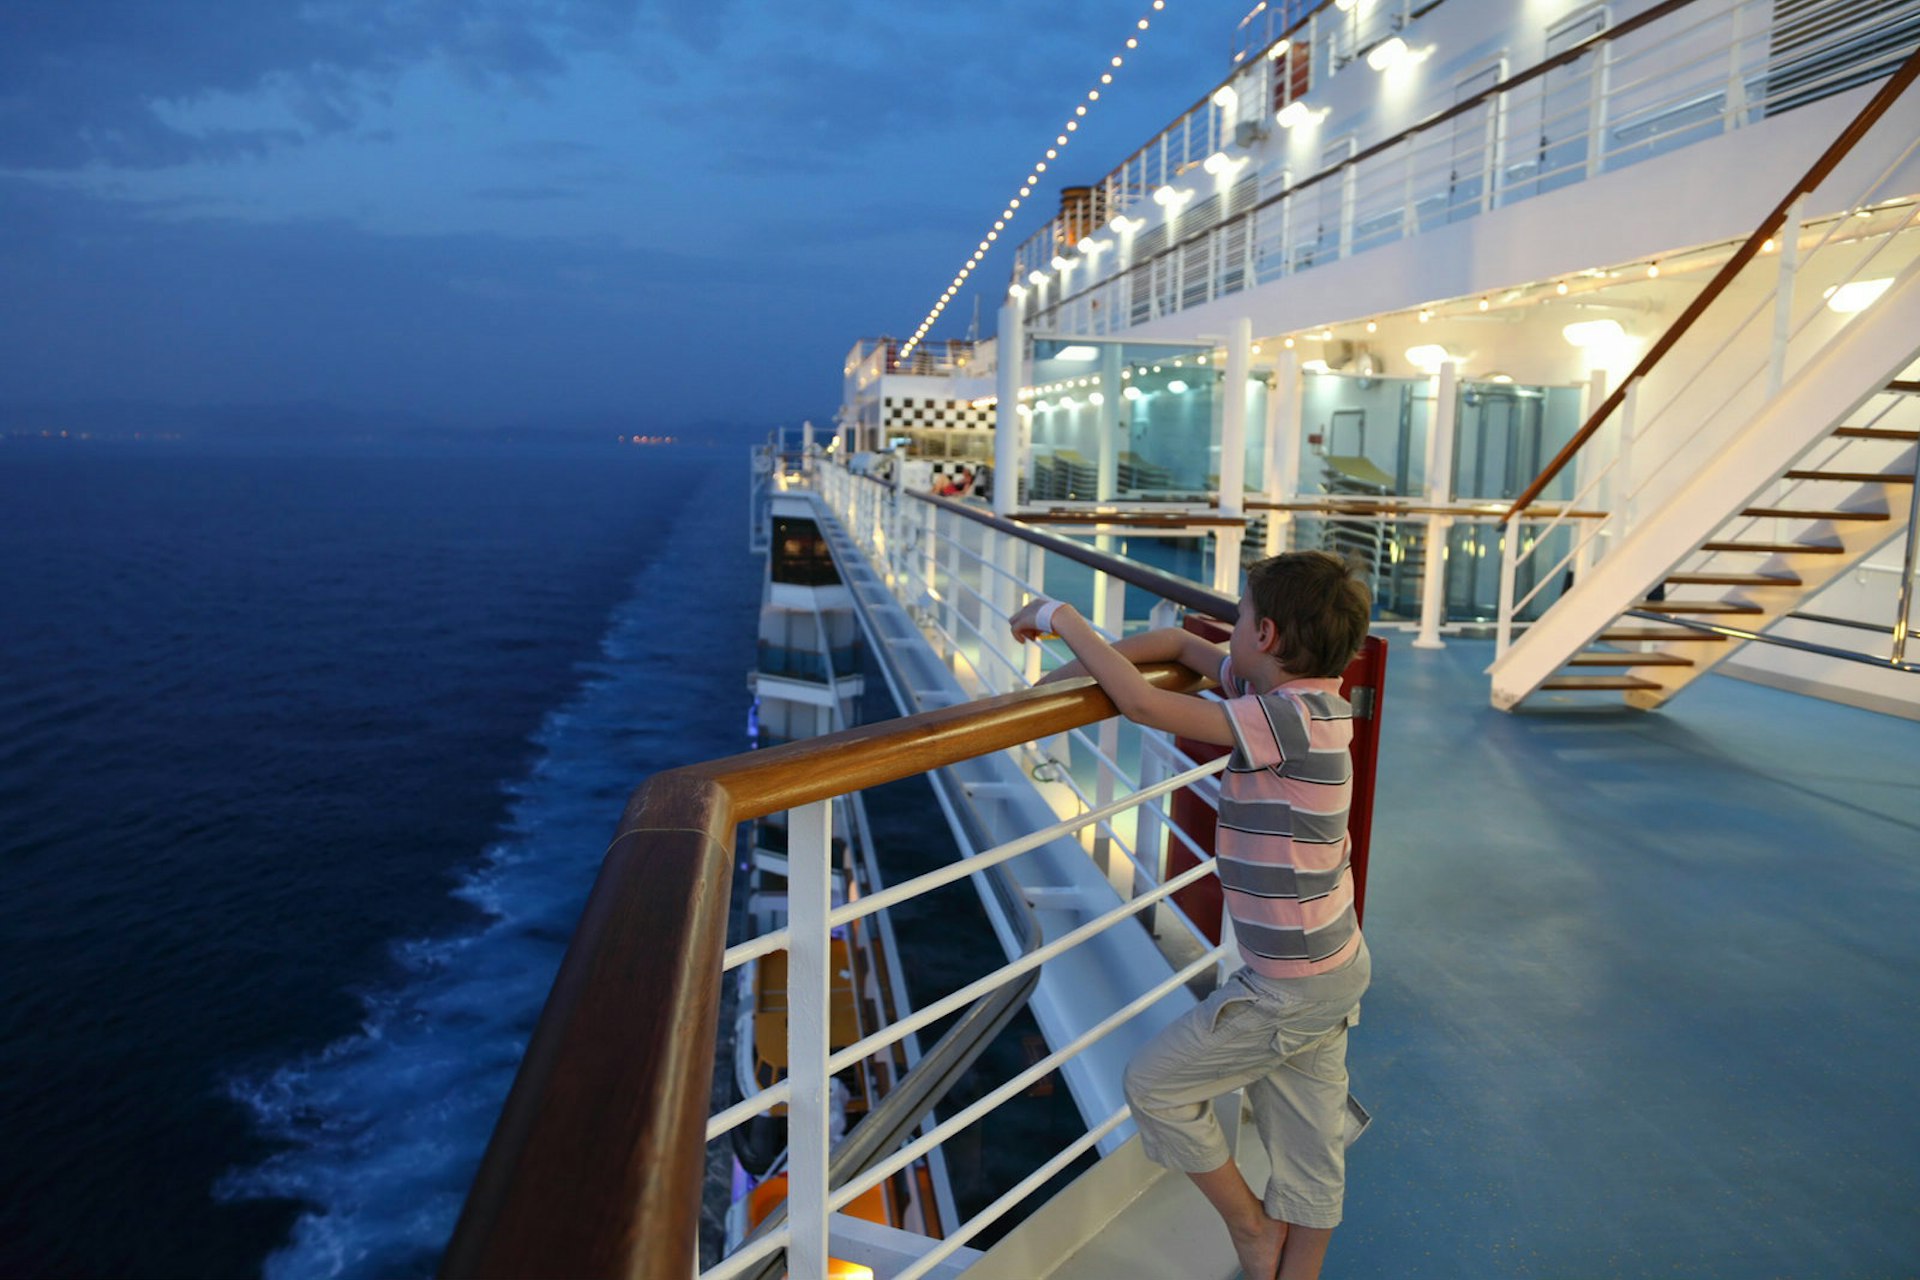 A young child looks over the balcony of a cruise ship as the sky grows dark © Pavel L Photo and Video / Shutterstock